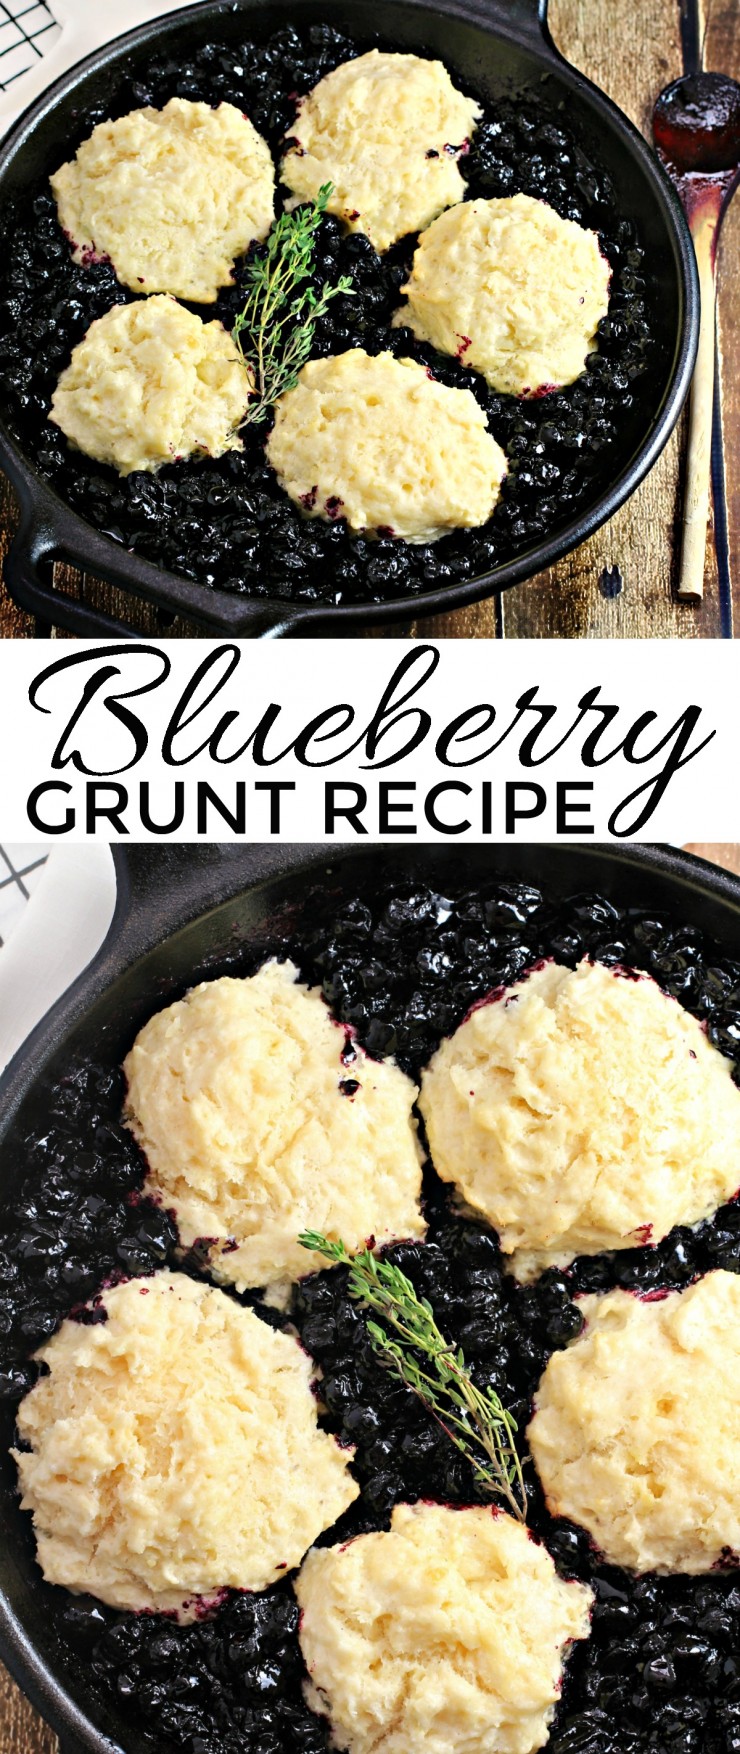  A Blueberry Grunt is a cobbler that is cooked on the stove top or over a campfire instead of in the oven. The drop biscuits steam to perfection in a bed of blueberries. This is a camping recipe that will really have you looking forward to dessert!